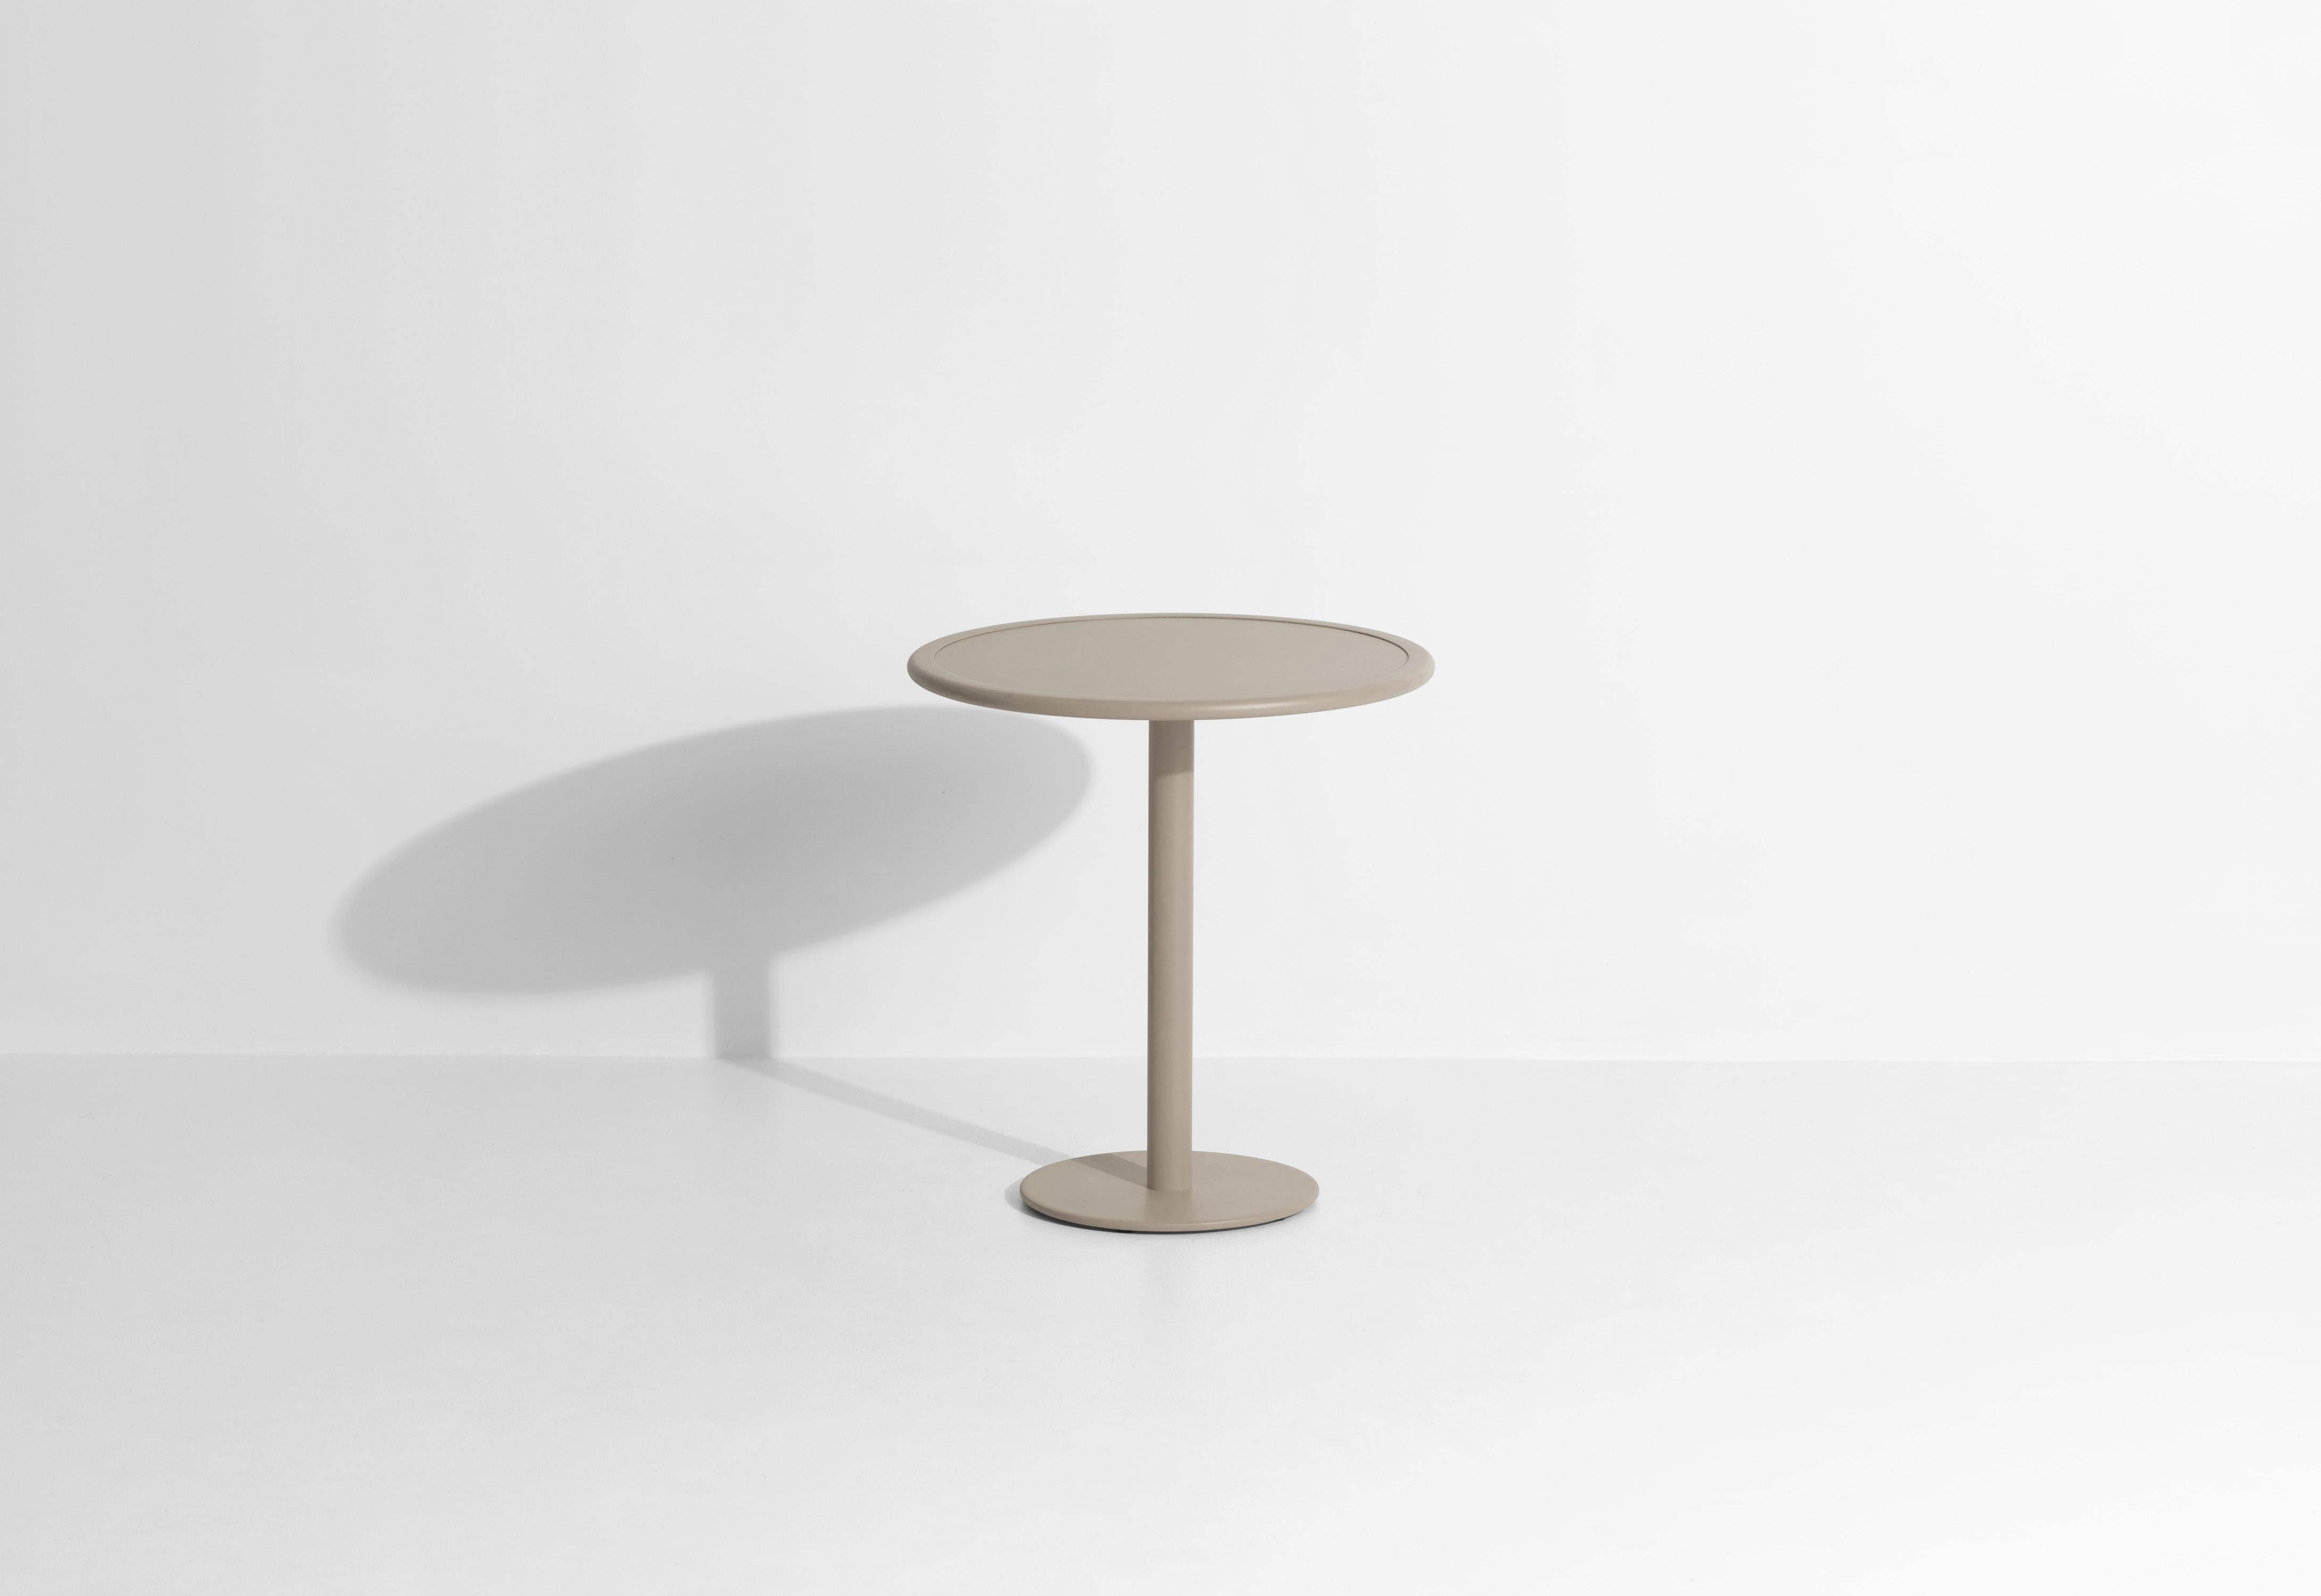 Petite Friture Week-End Bistro Round Dining Table in Dune Aluminium by Studio BrichetZiegler, 2017

The week-end collection is a full range of outdoor furniture, in aluminium grained epoxy paint, matt finish, that includes 18 functions and 8